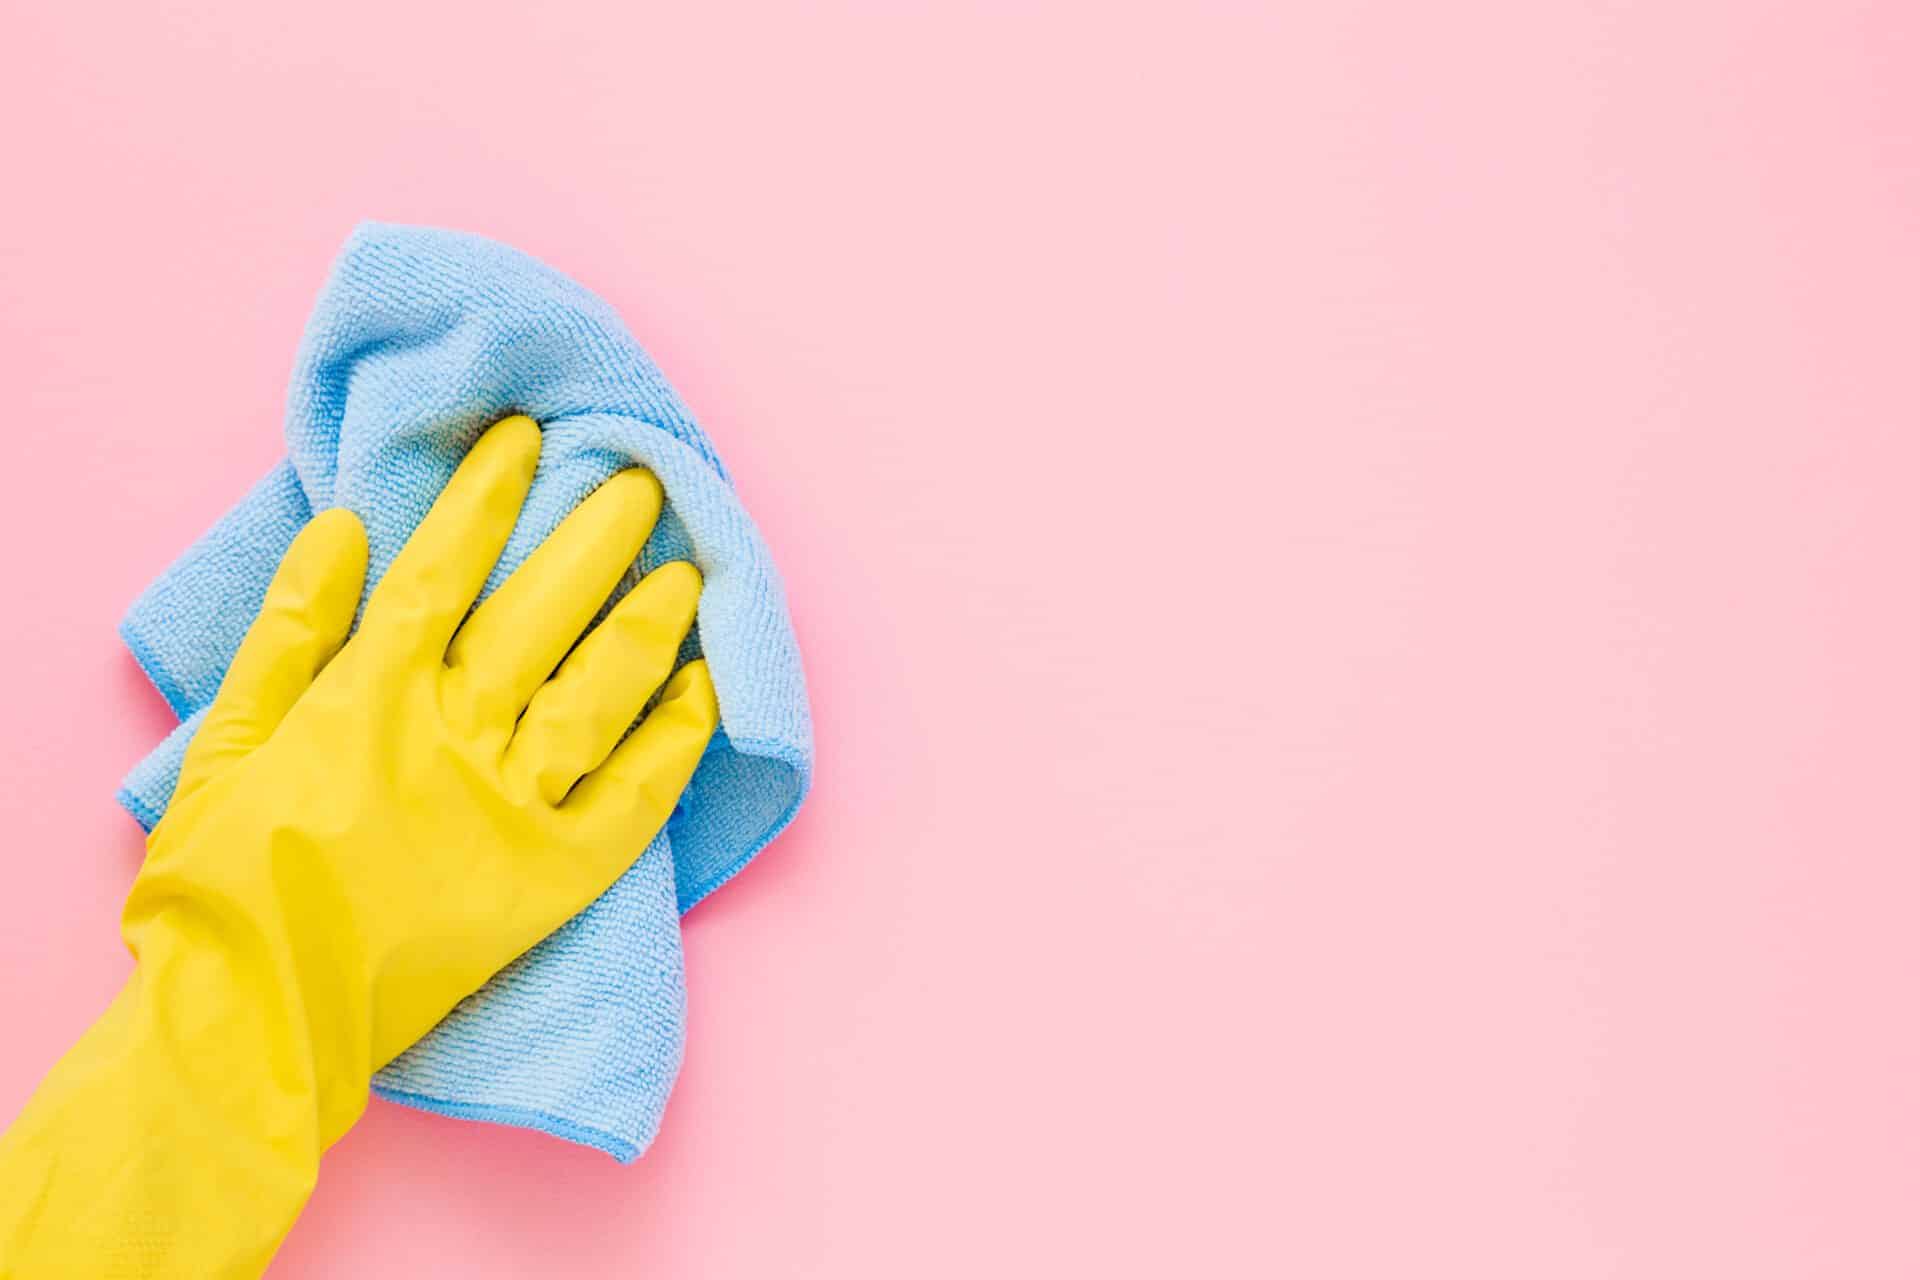 Hand In Yellow Rubber Protective Glove Wiping Pastel Pink Wall From Dust With Blue Dry Rag